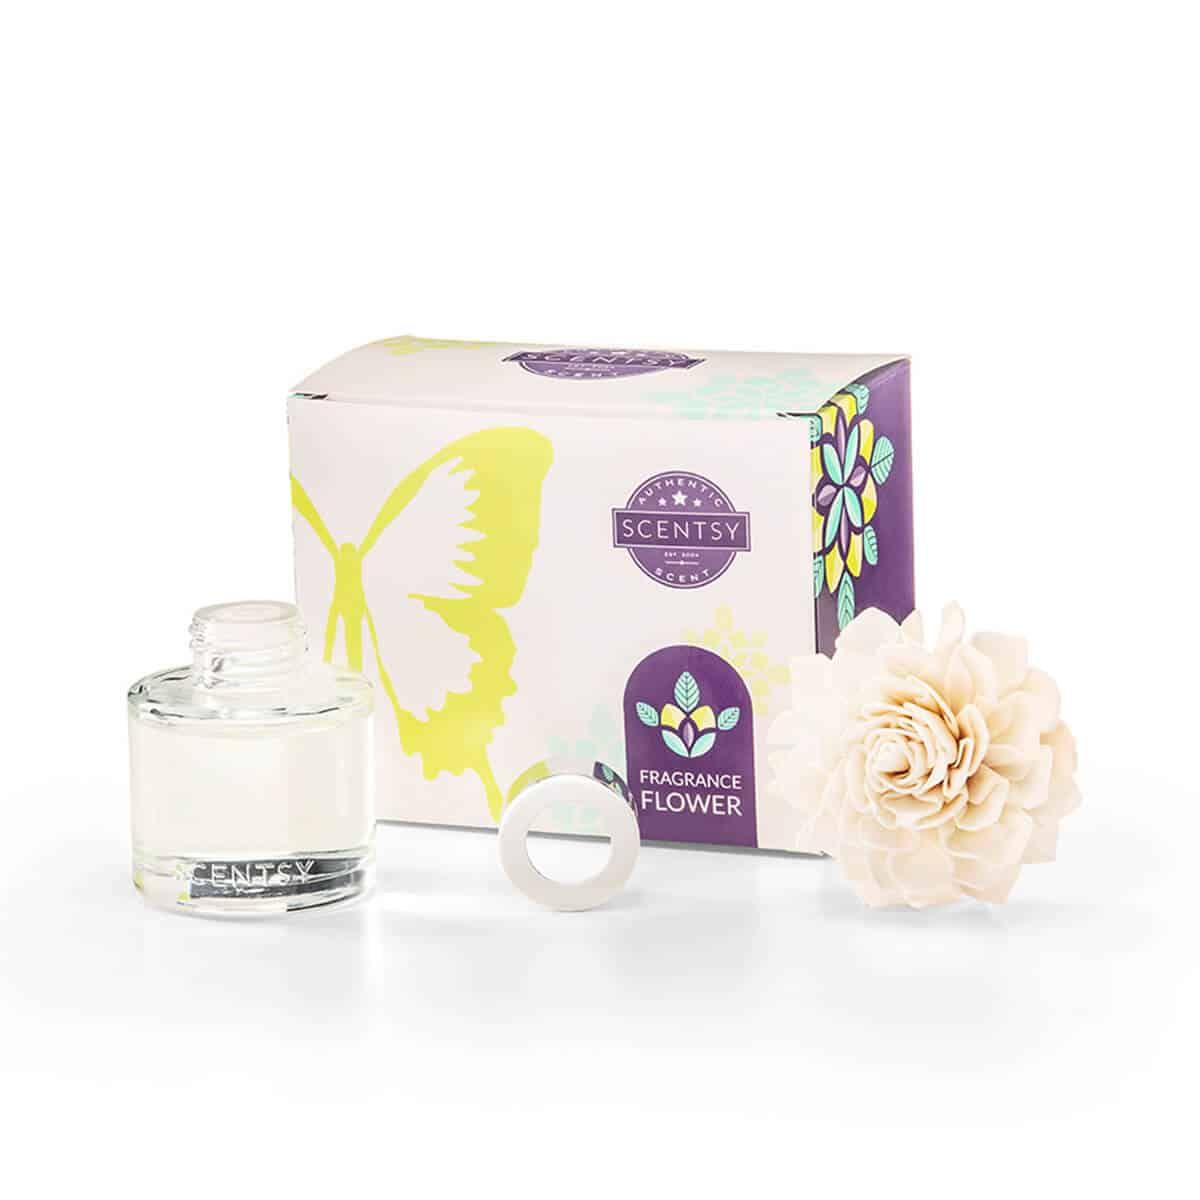 Scentsy Fragrance Flower  contents